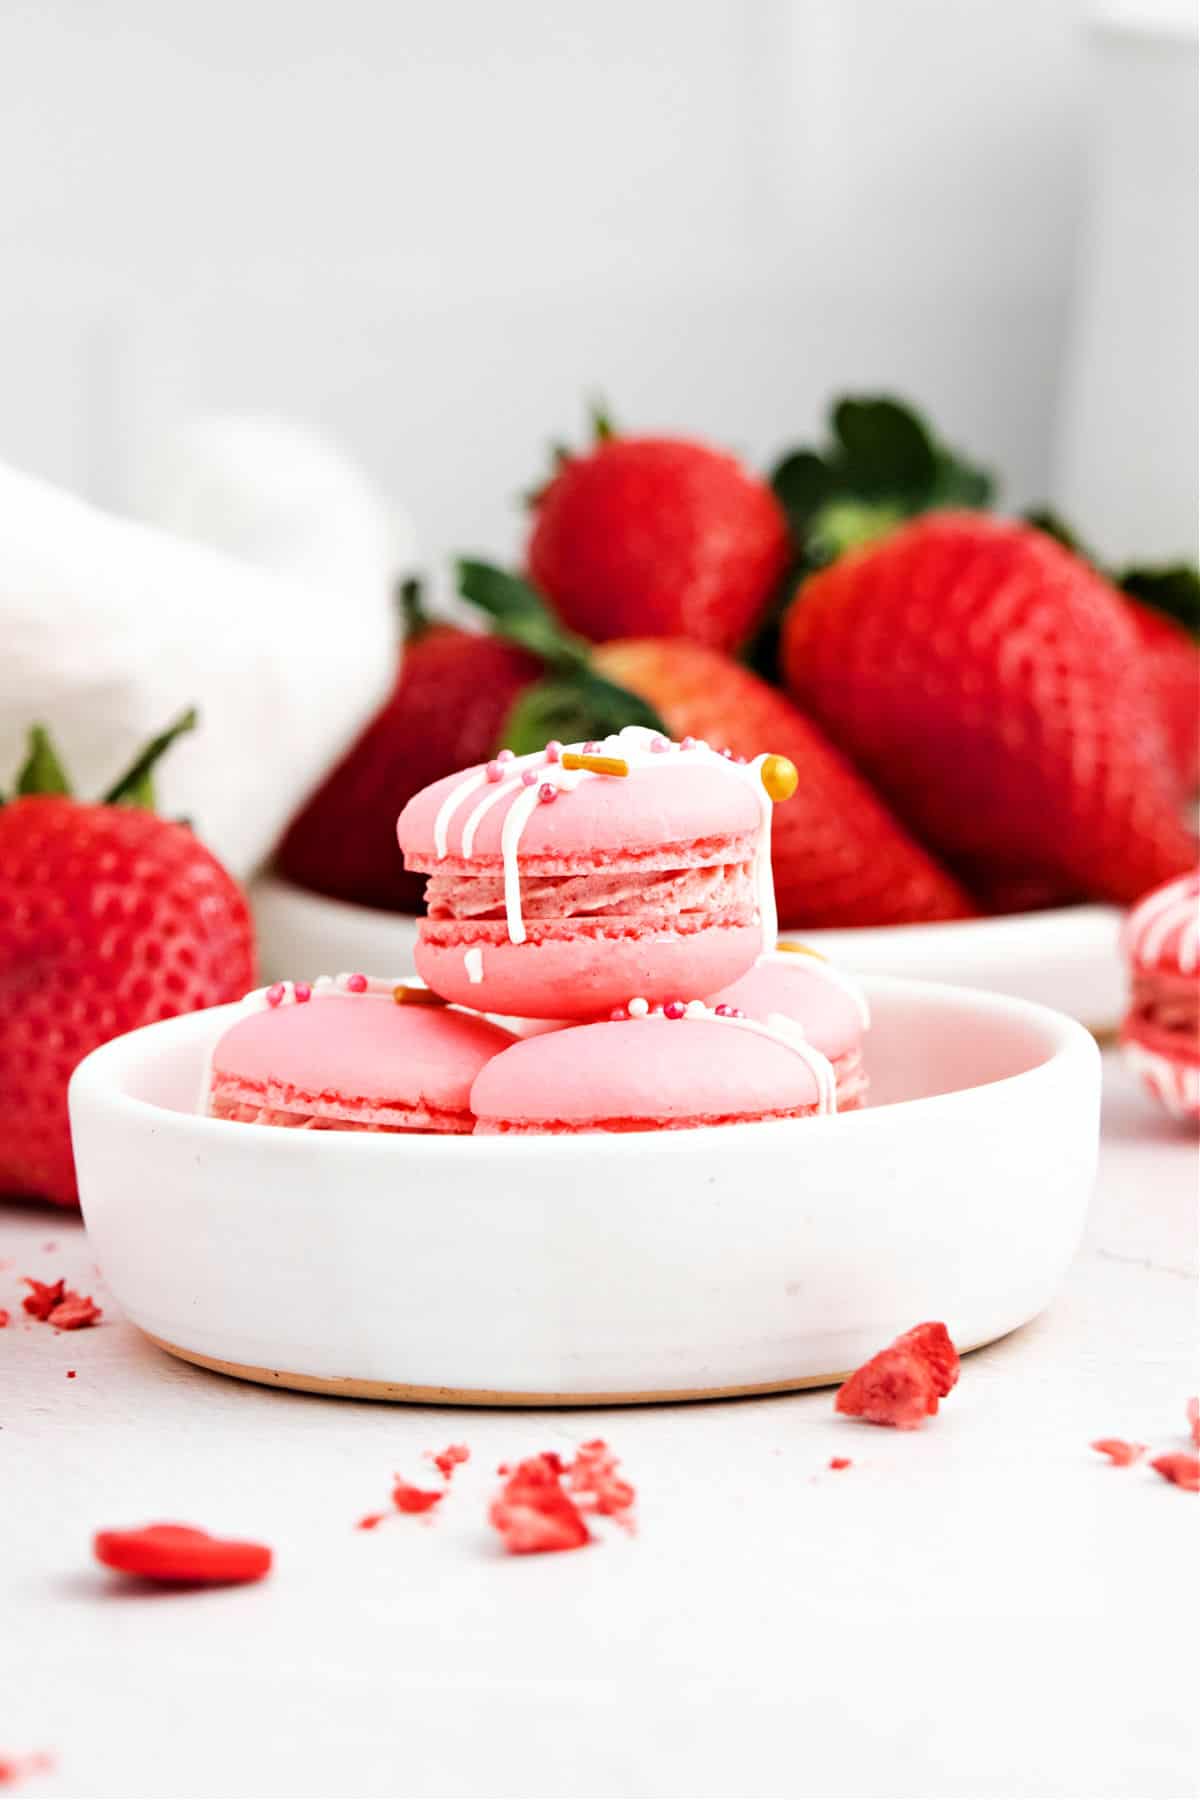 Strawberry macarons in a bowl with fresh strawberries in background.